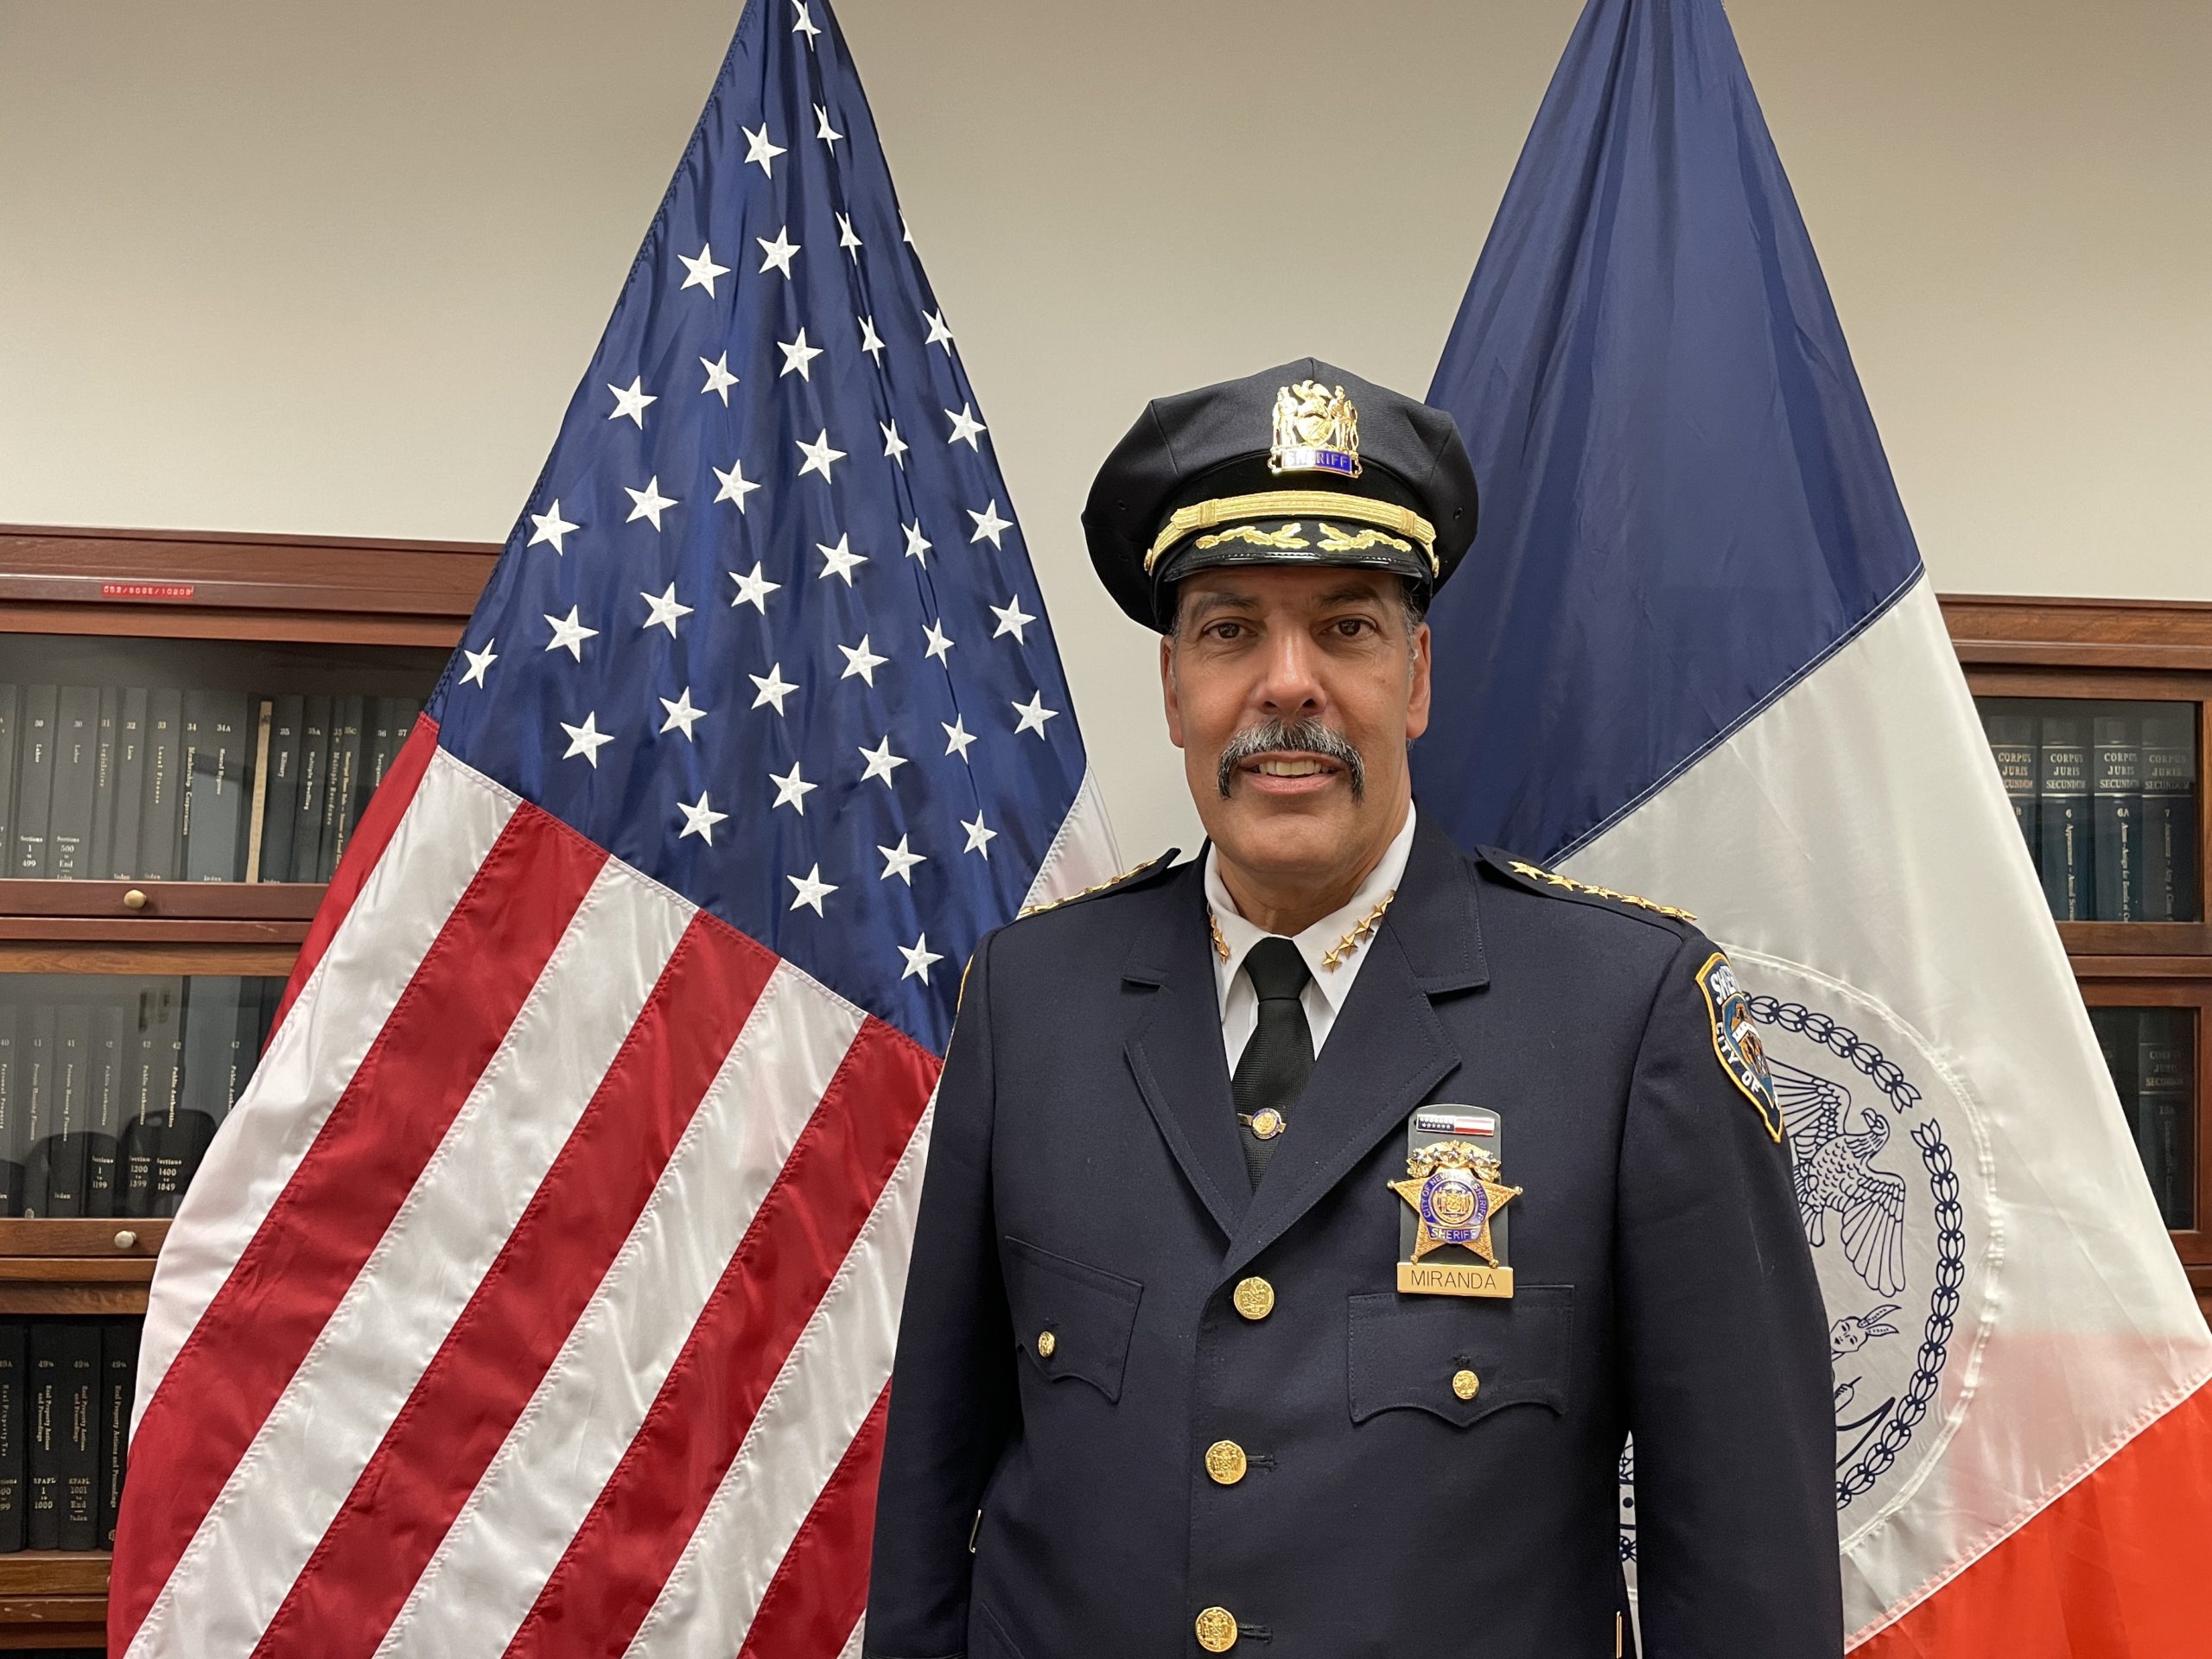 One-on-one with the New York City sheriff